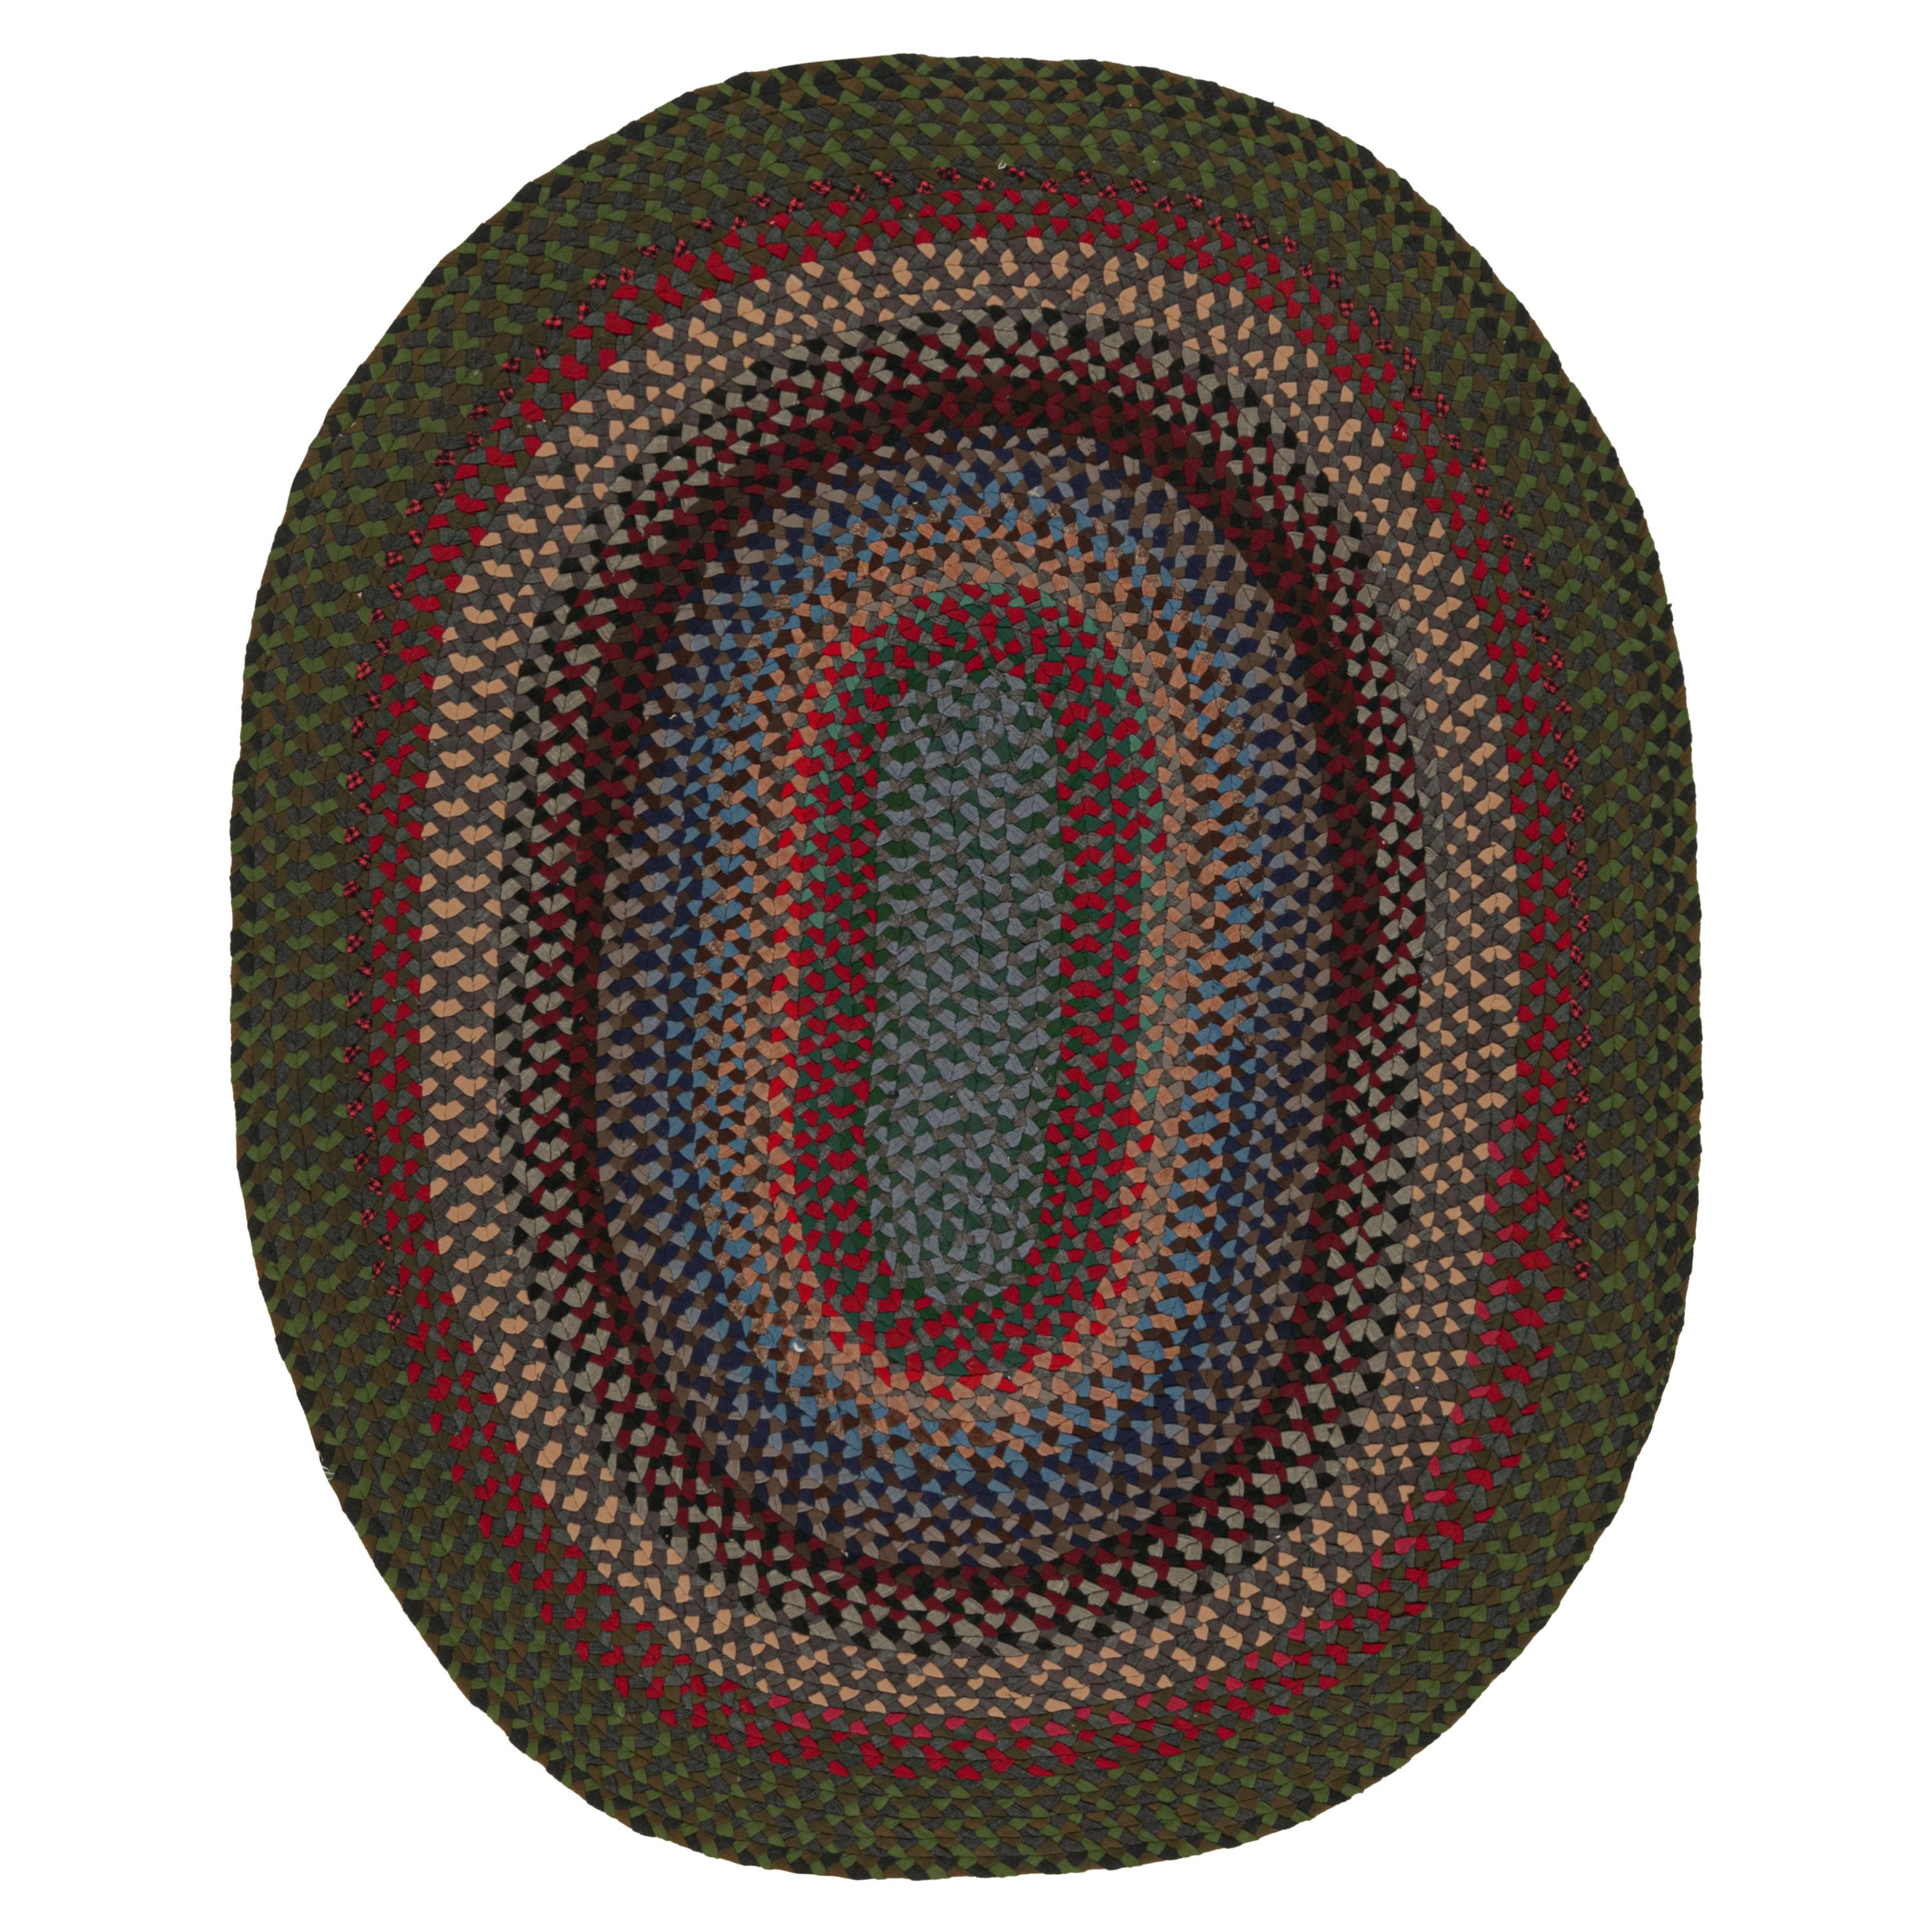 Antique Hooked Oval Rug with Polychromatic Braided Stripes, from Rug & Kilim